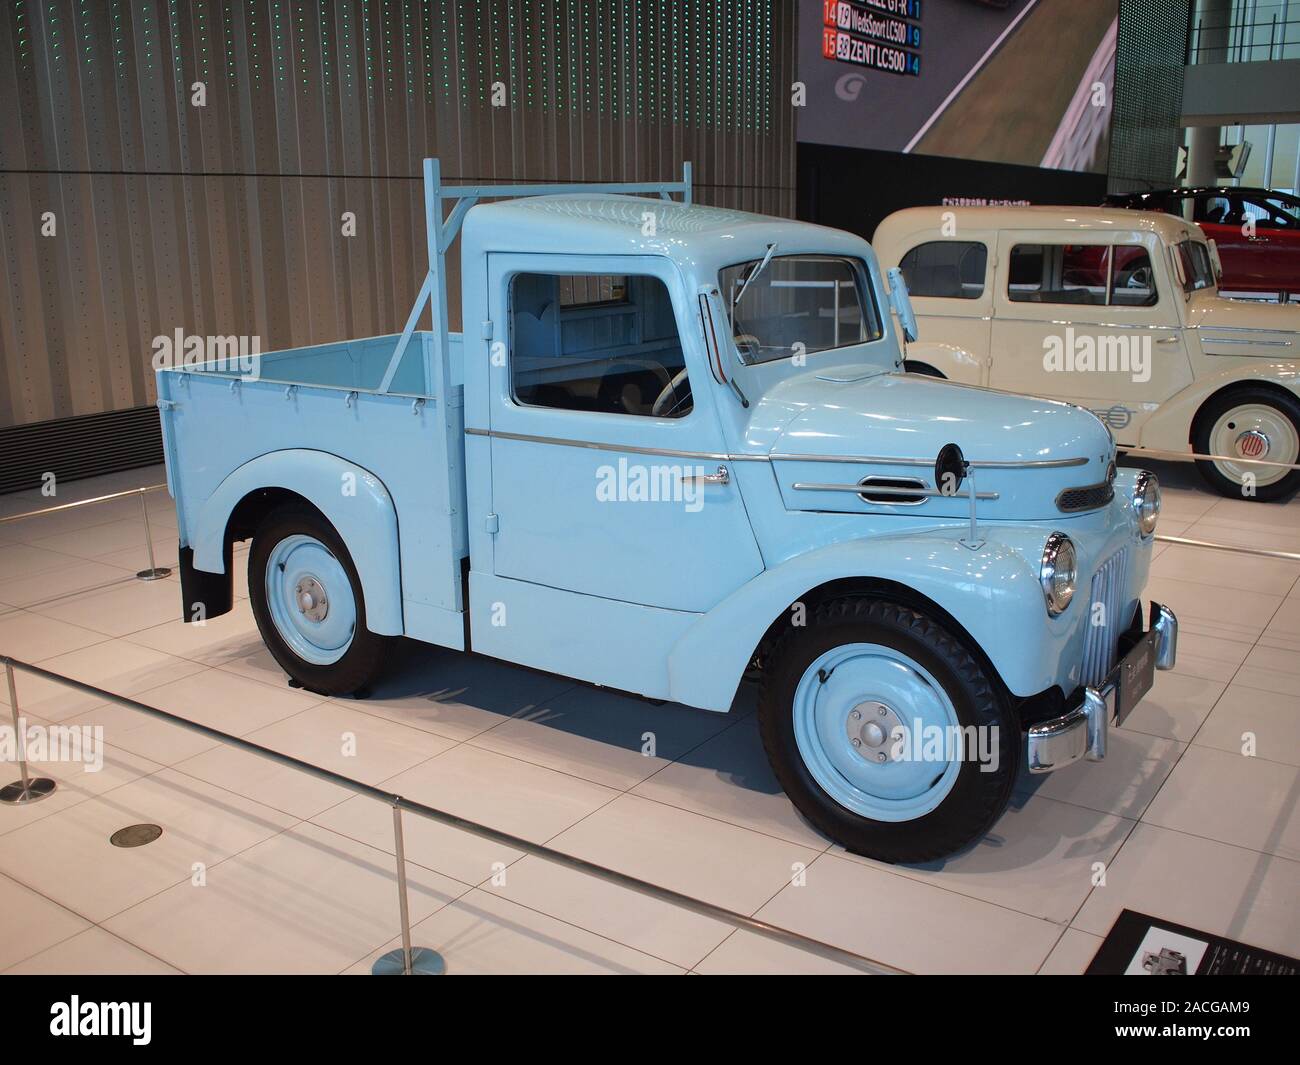 1947 Nissan TAMA Pickup Truck at the Nissan Global Headquarters Gallery Stock Photo